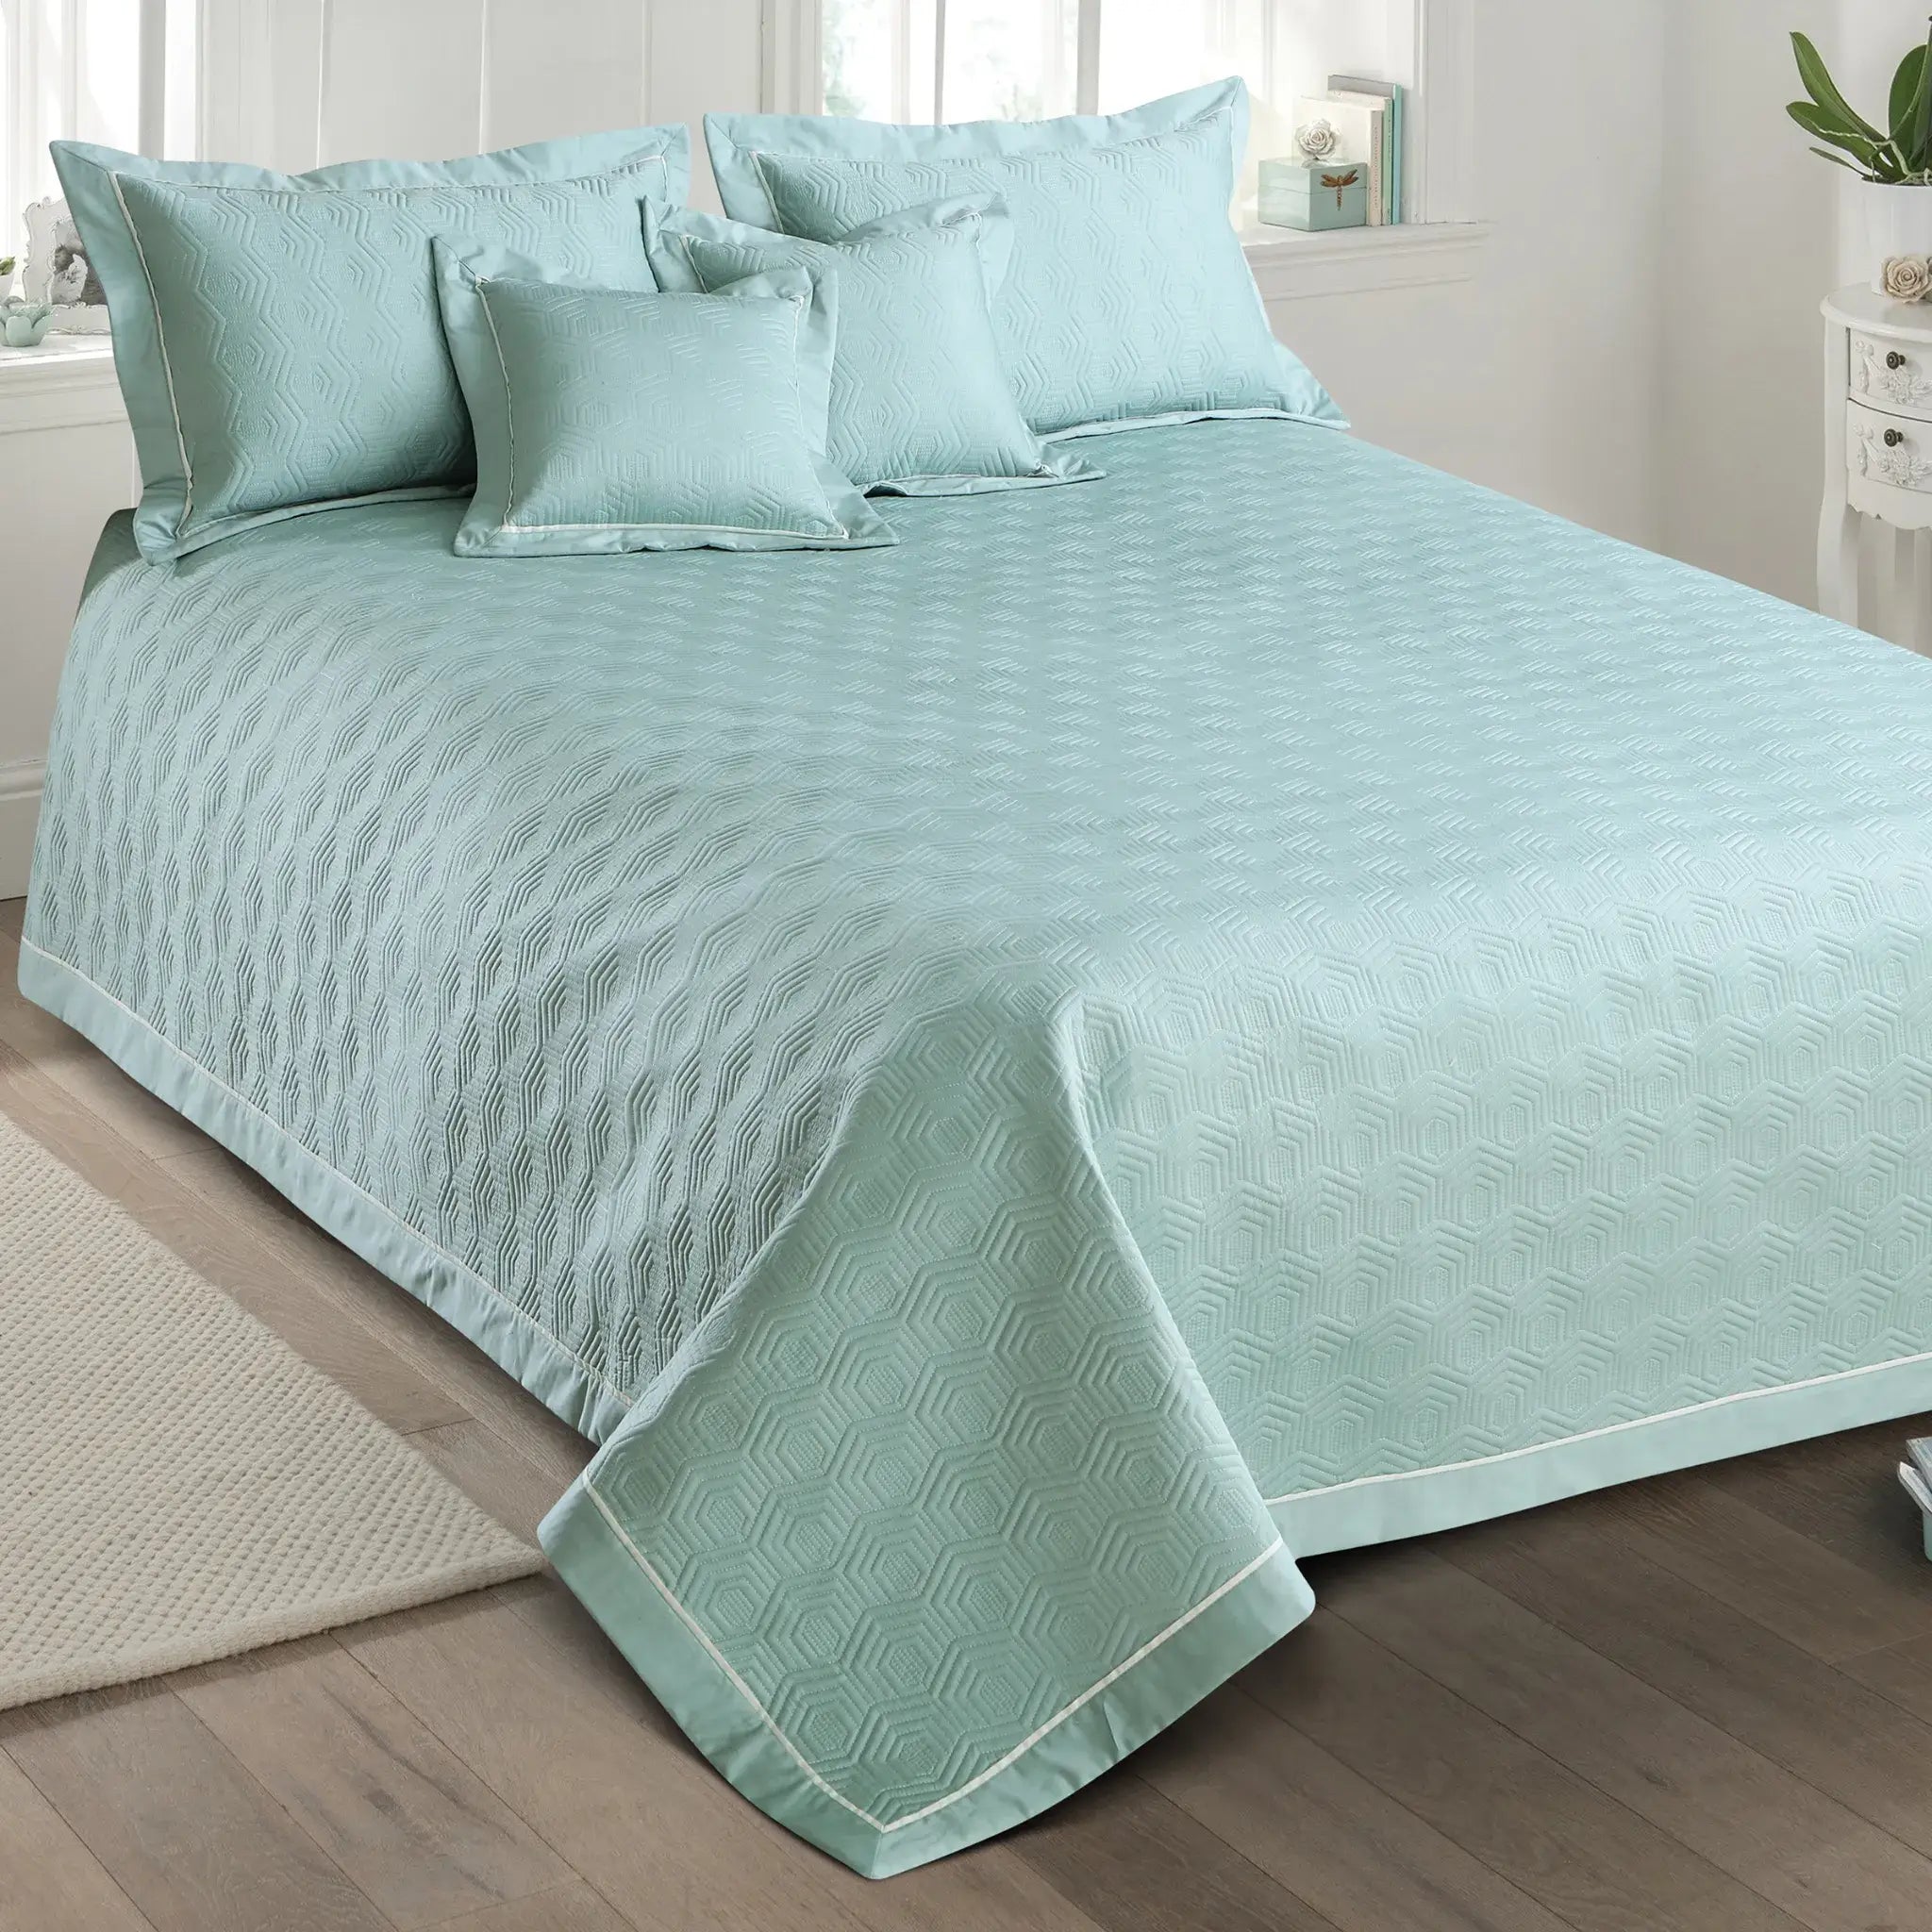 Malako Kairo 500 TC Paris Green Solid King Size 100% Cotton Quilted Bed Cover Set - MALAKO